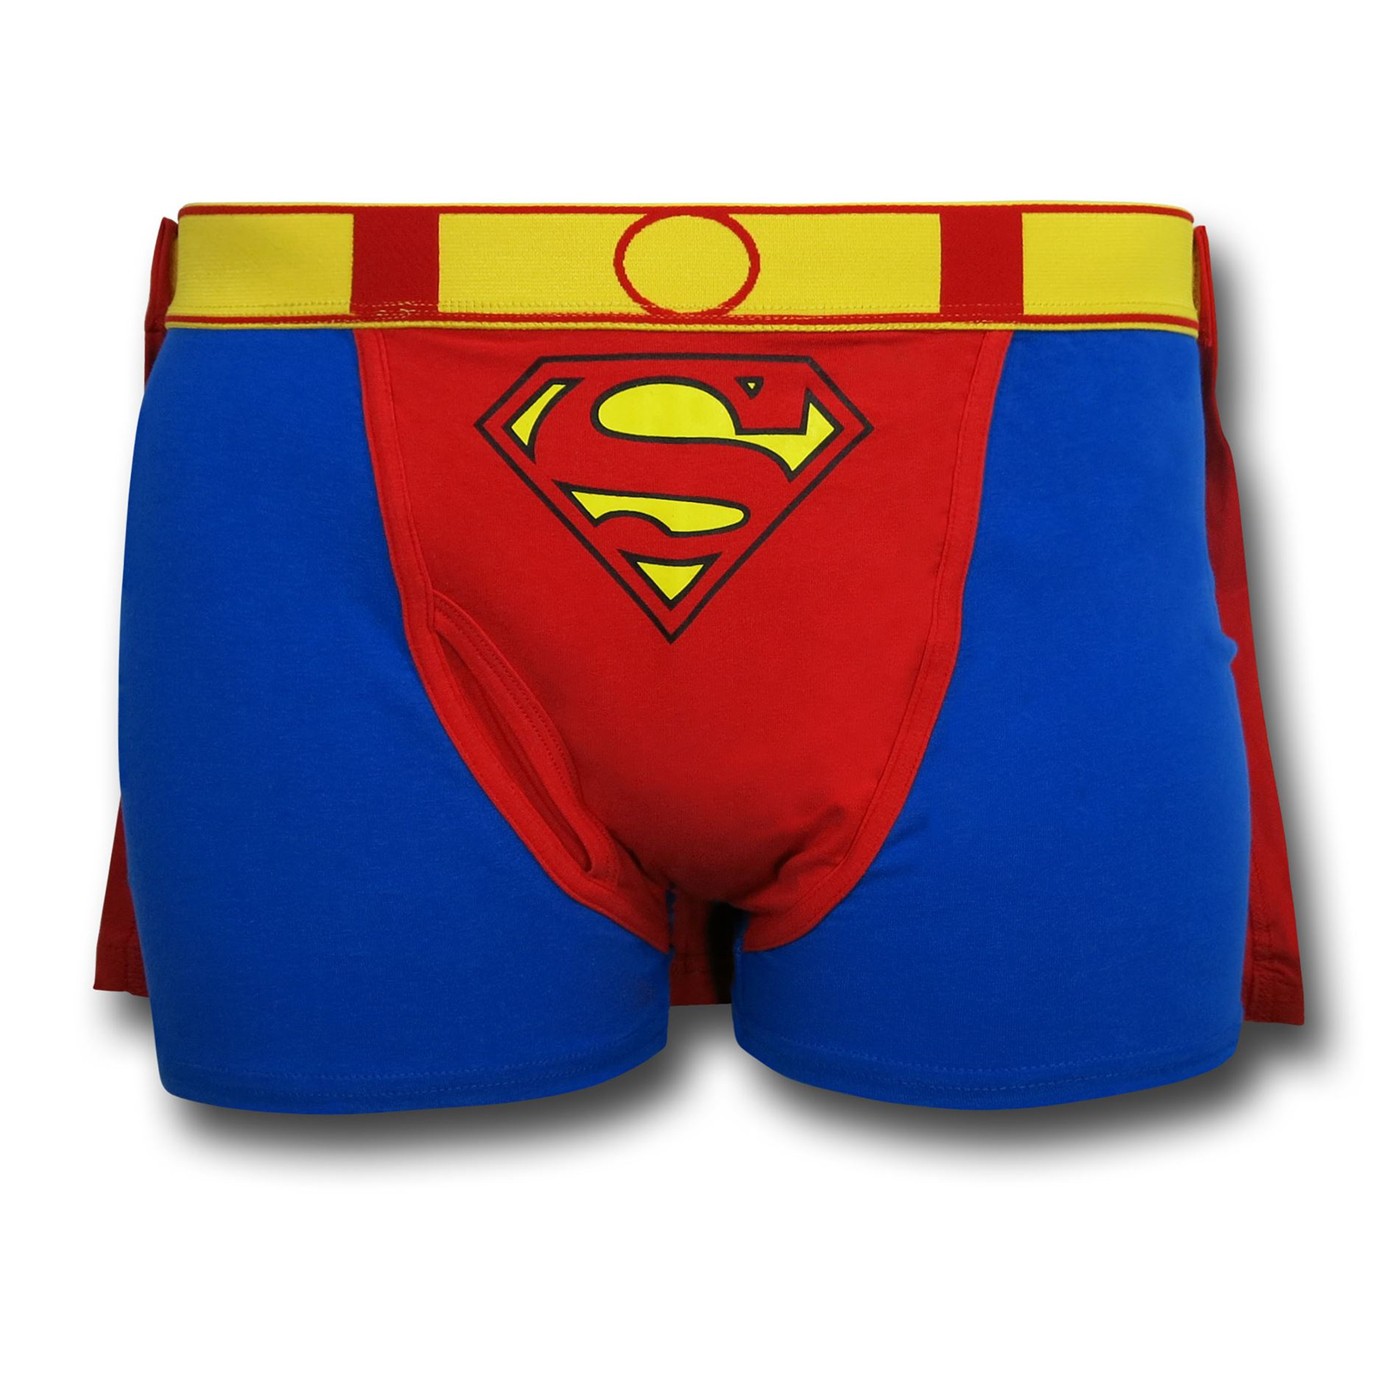 NWT BRIEFLY STATED MAN OF STEEL BLUE YELLOW RED BLACK BOXER WITH CAPE SZ MEDIUM 